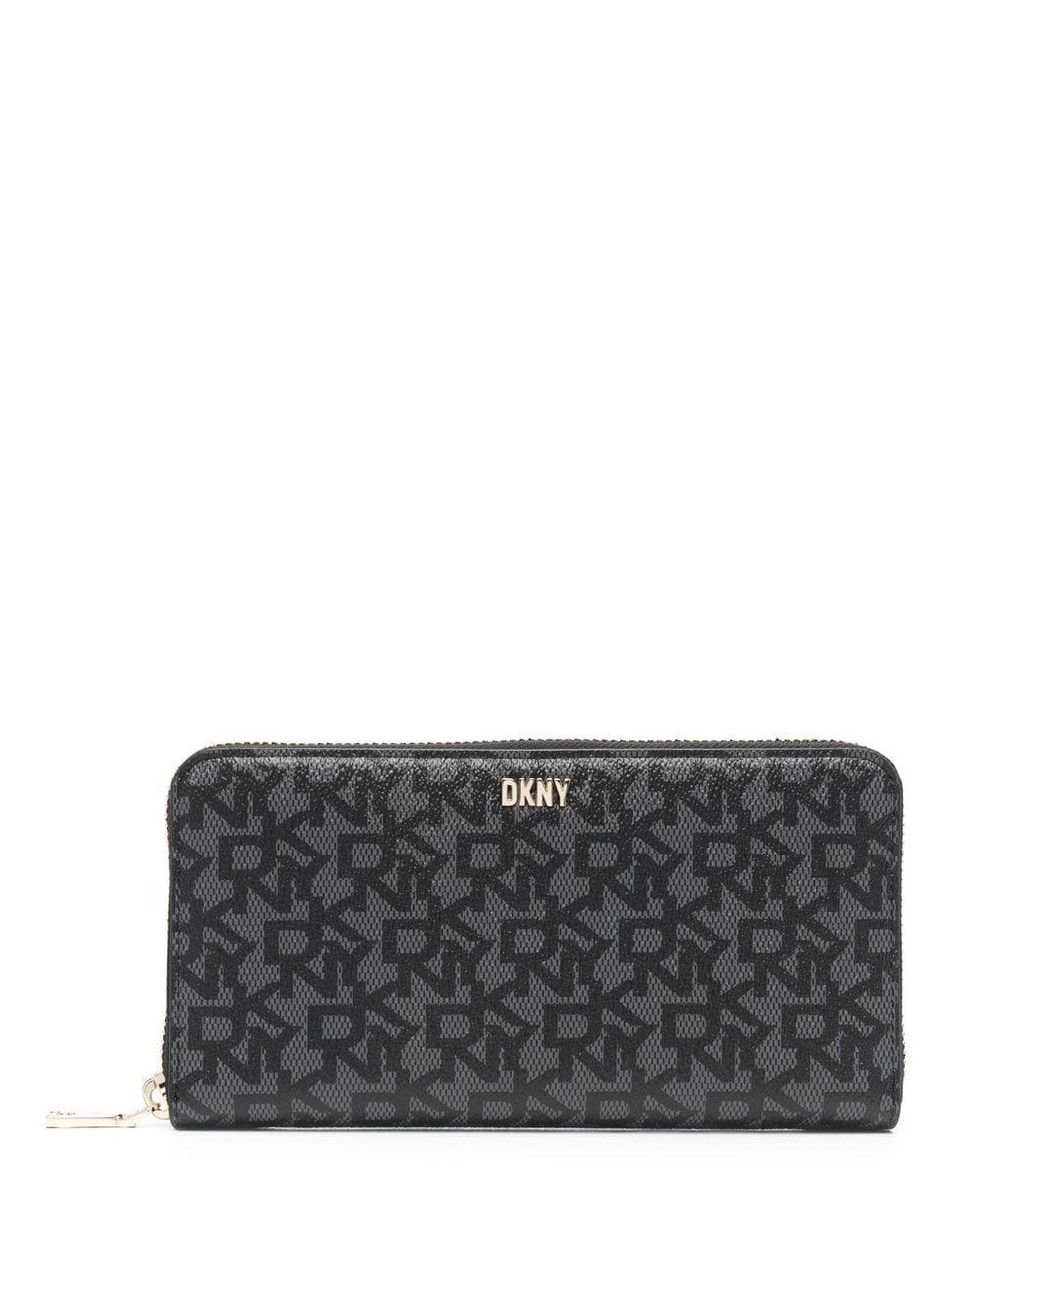 DKNY Leather Quilted Cardholder - Tan Color | AH Brands